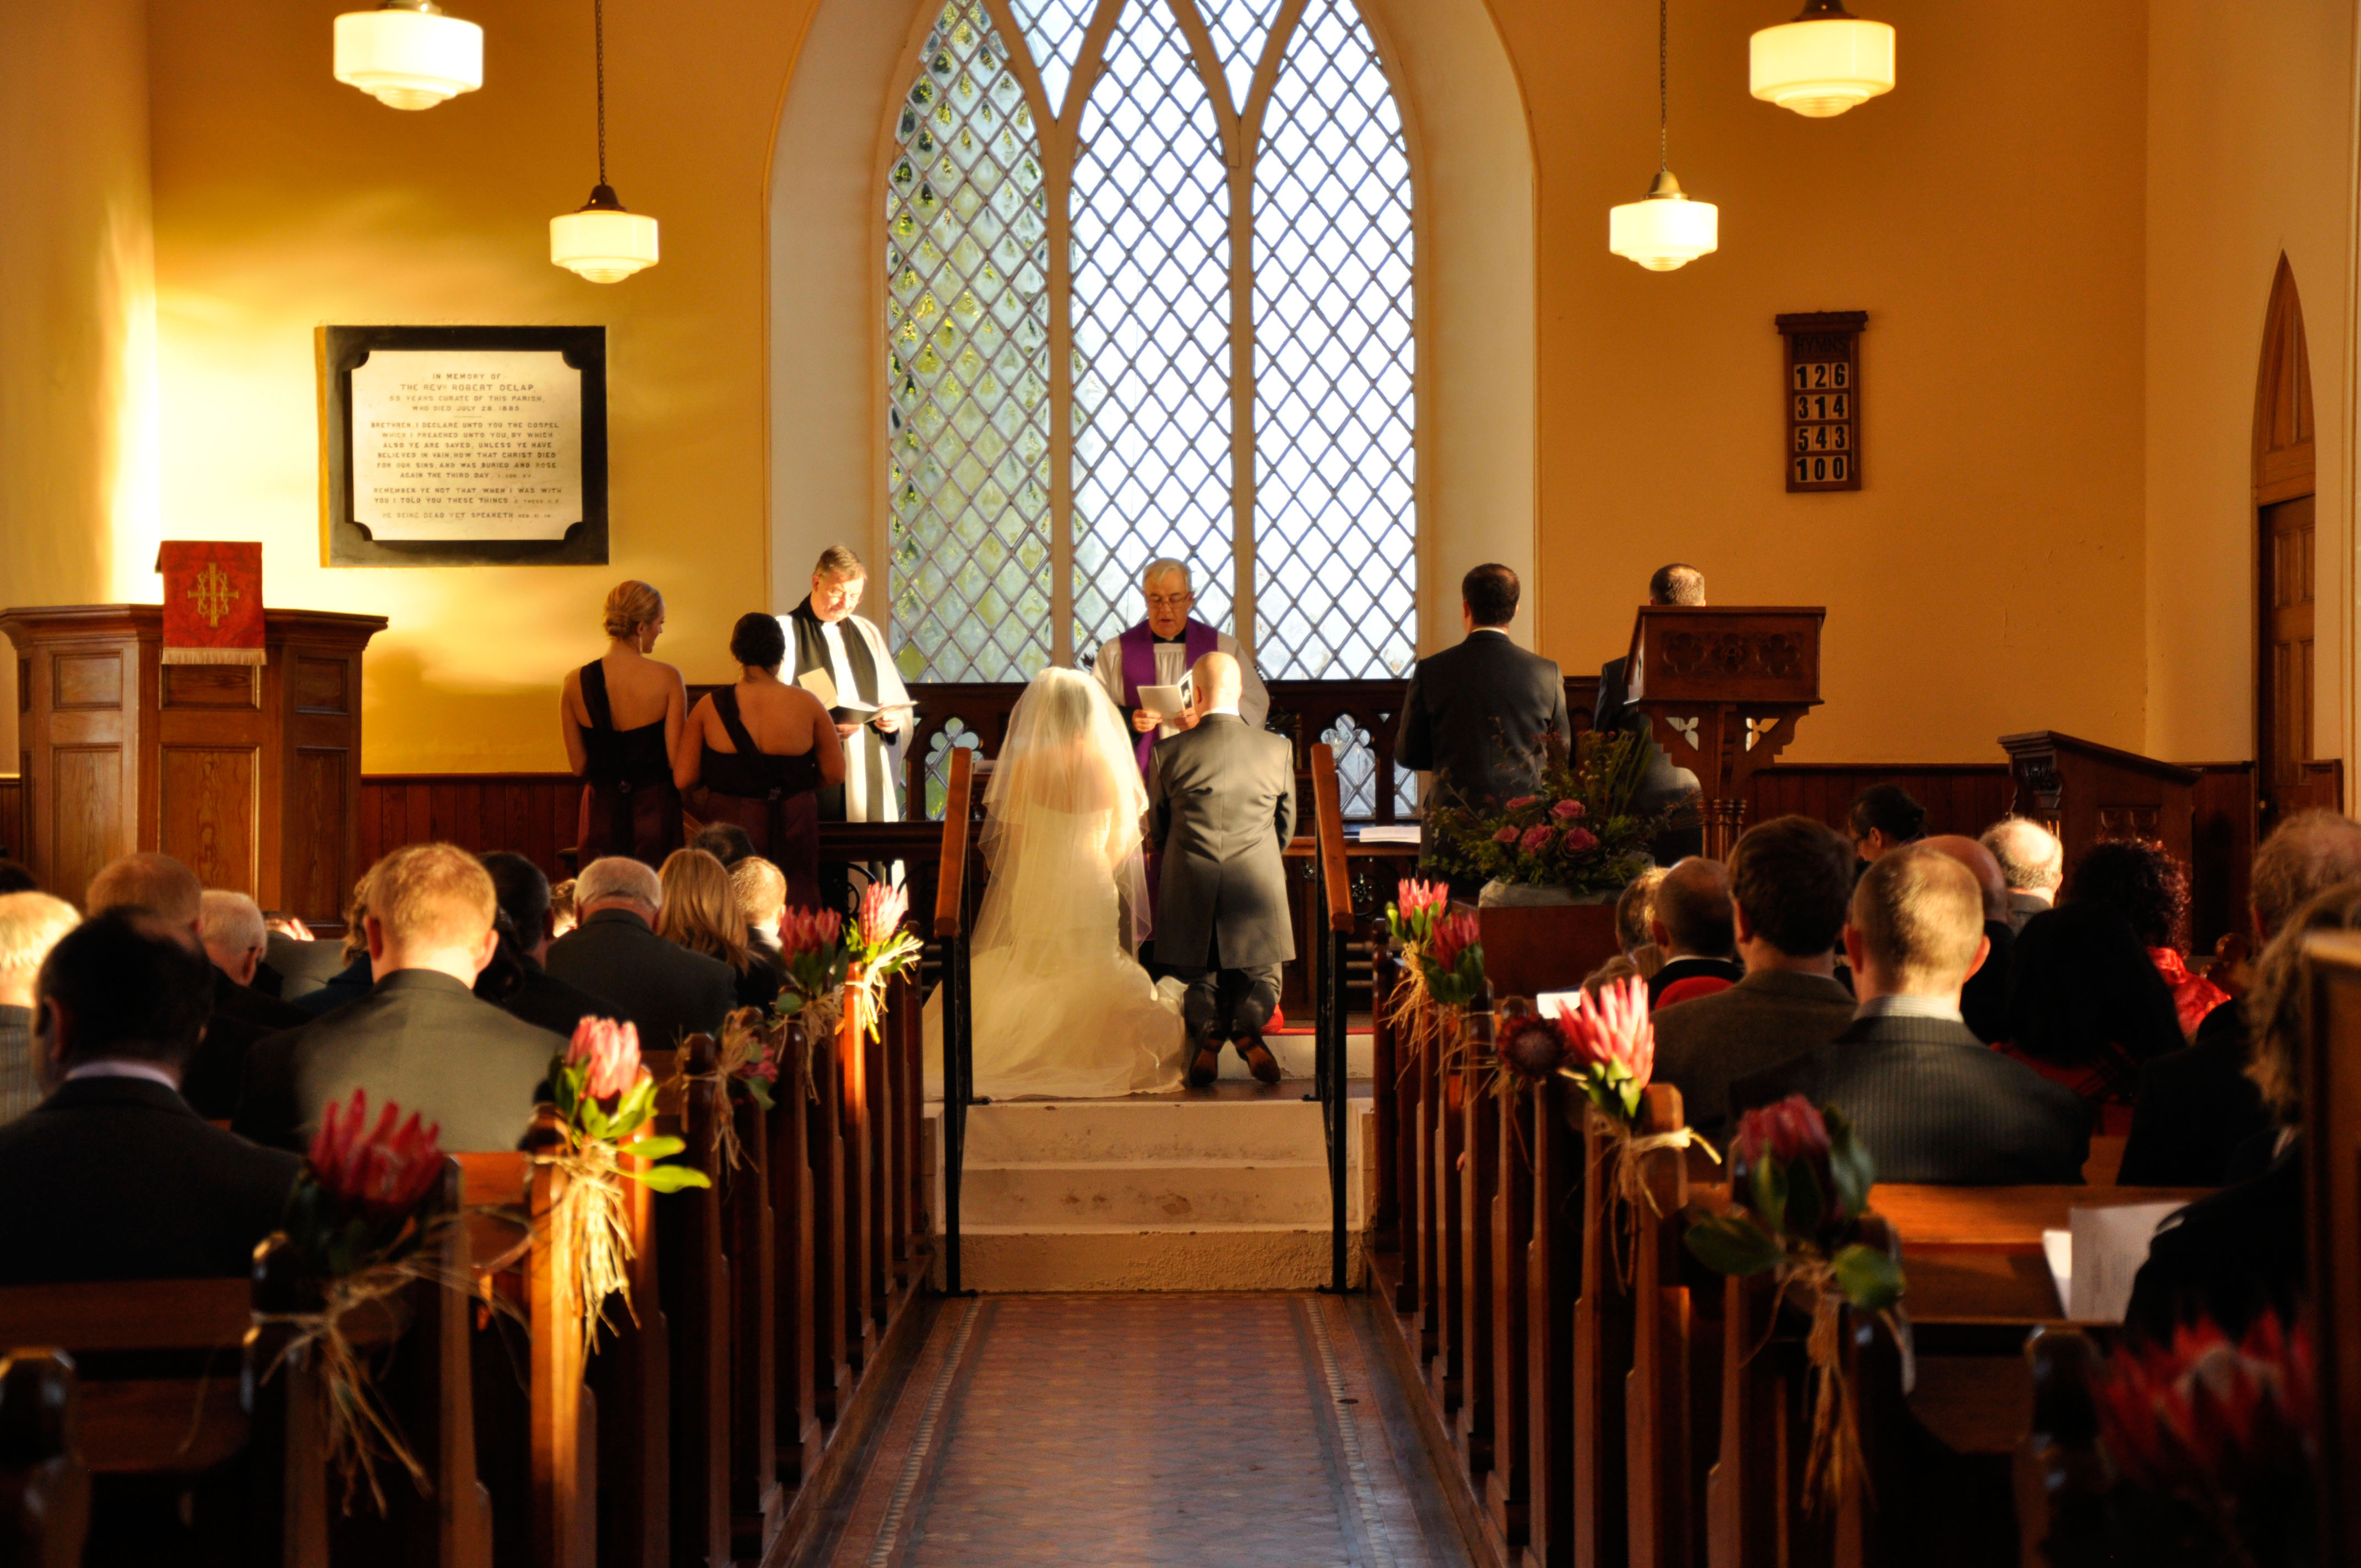 Figures show decade-long decline in Catholic marriage in Ireland